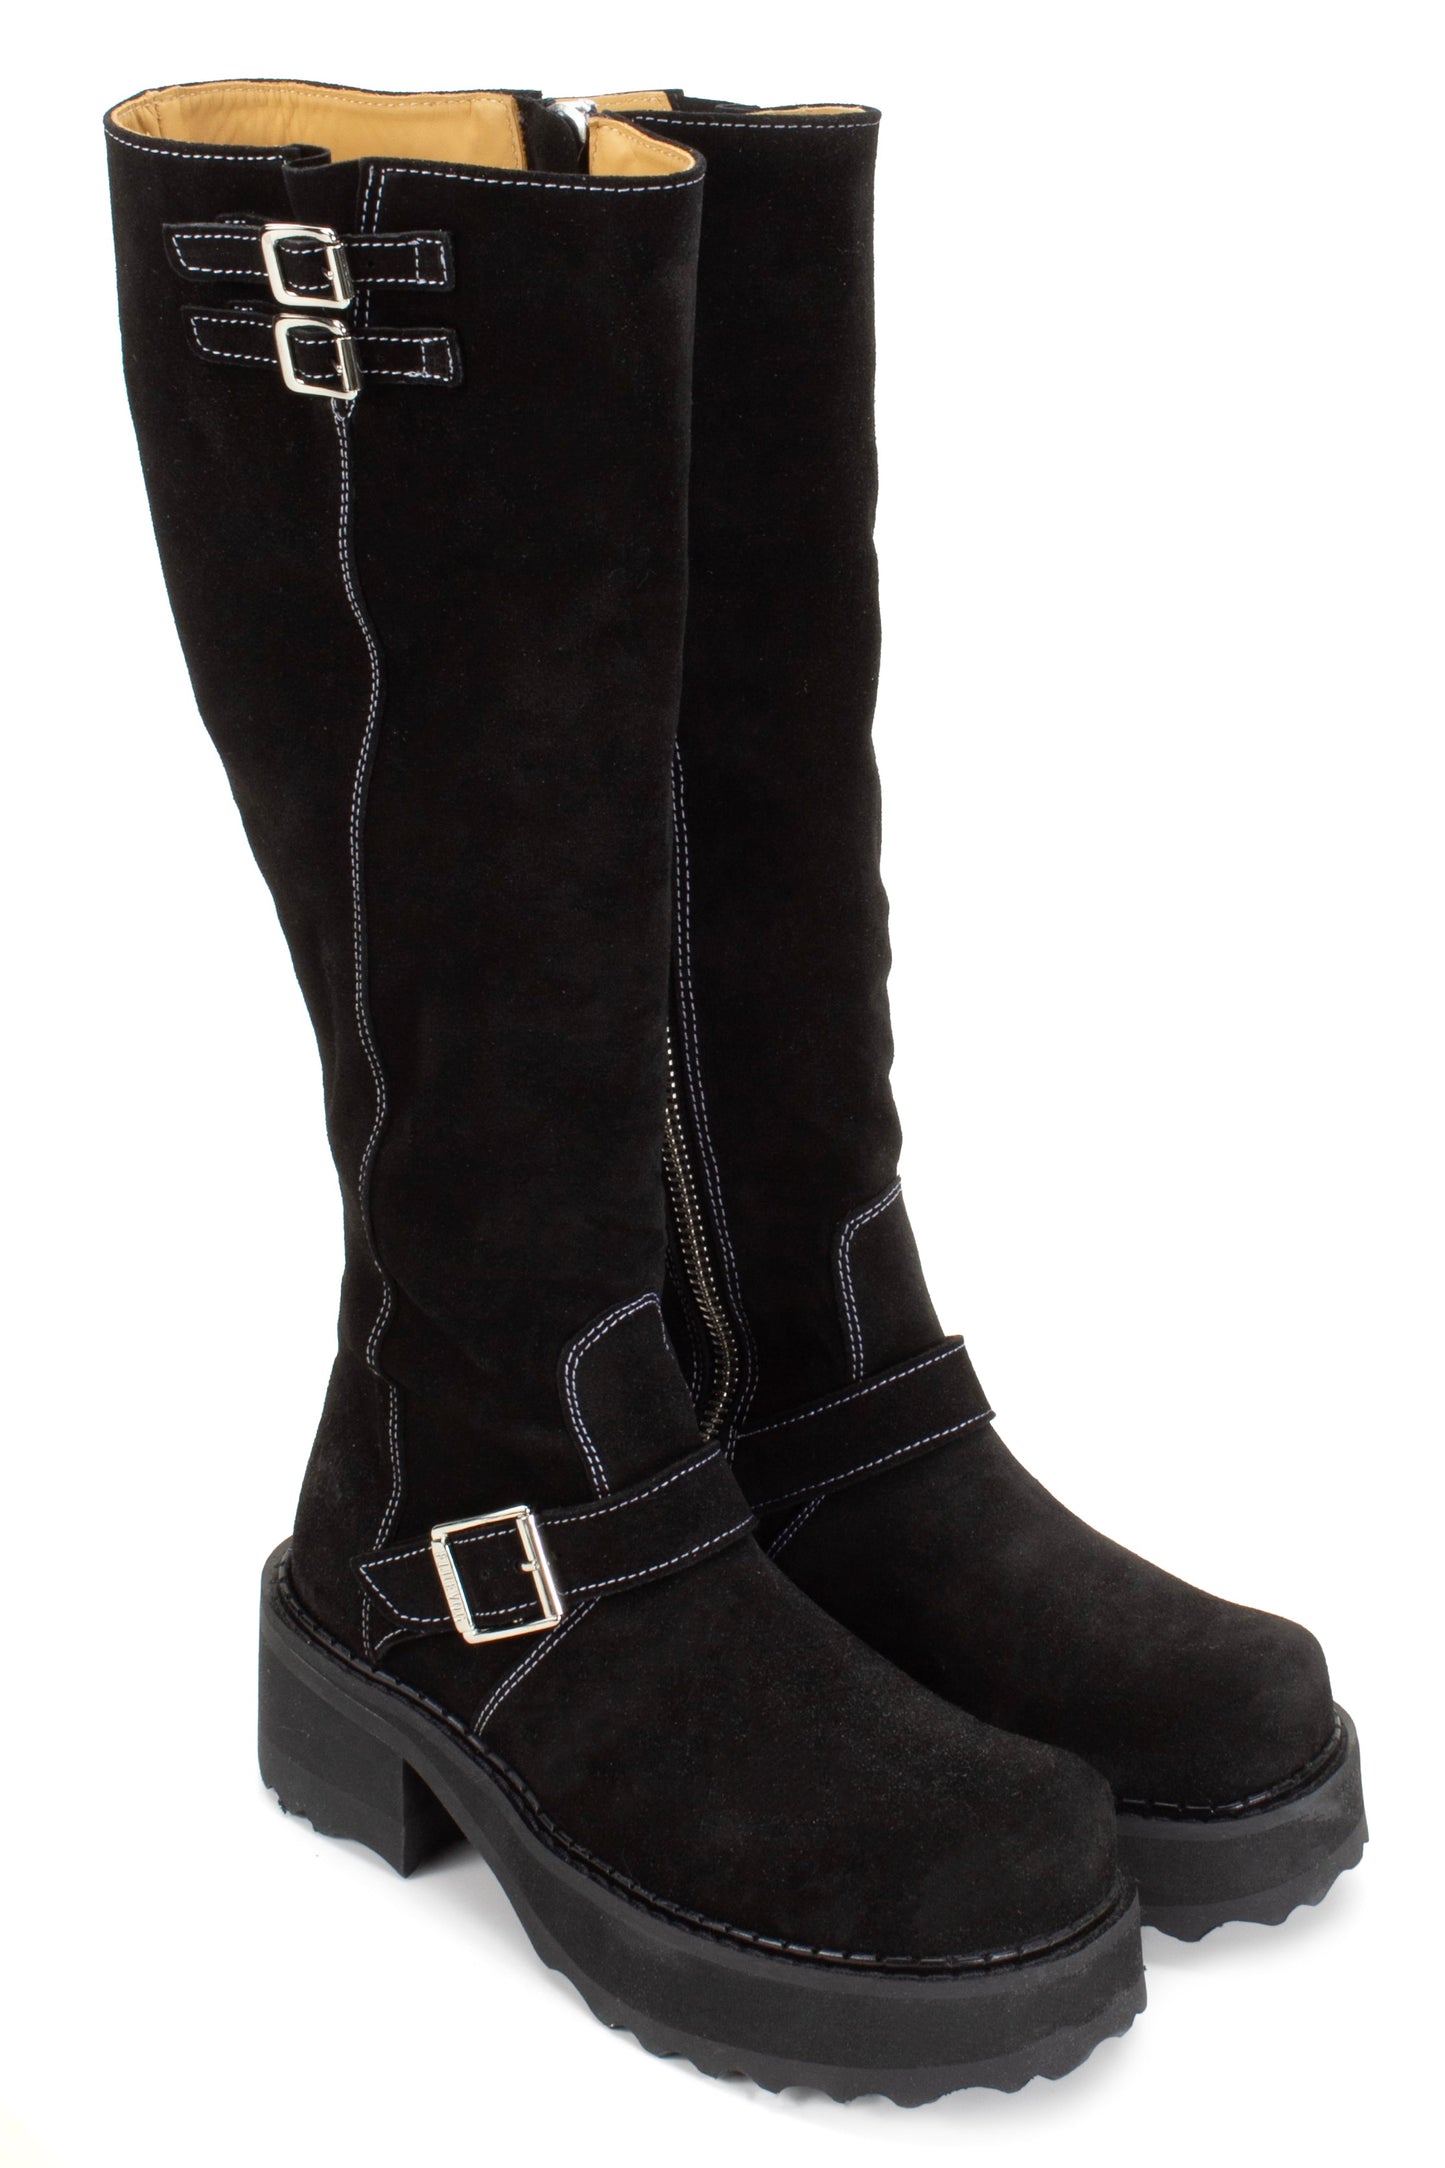 Black suede Boot, under-the-knee, 2 buckles at top, 1 on foot with large belt, high heel 